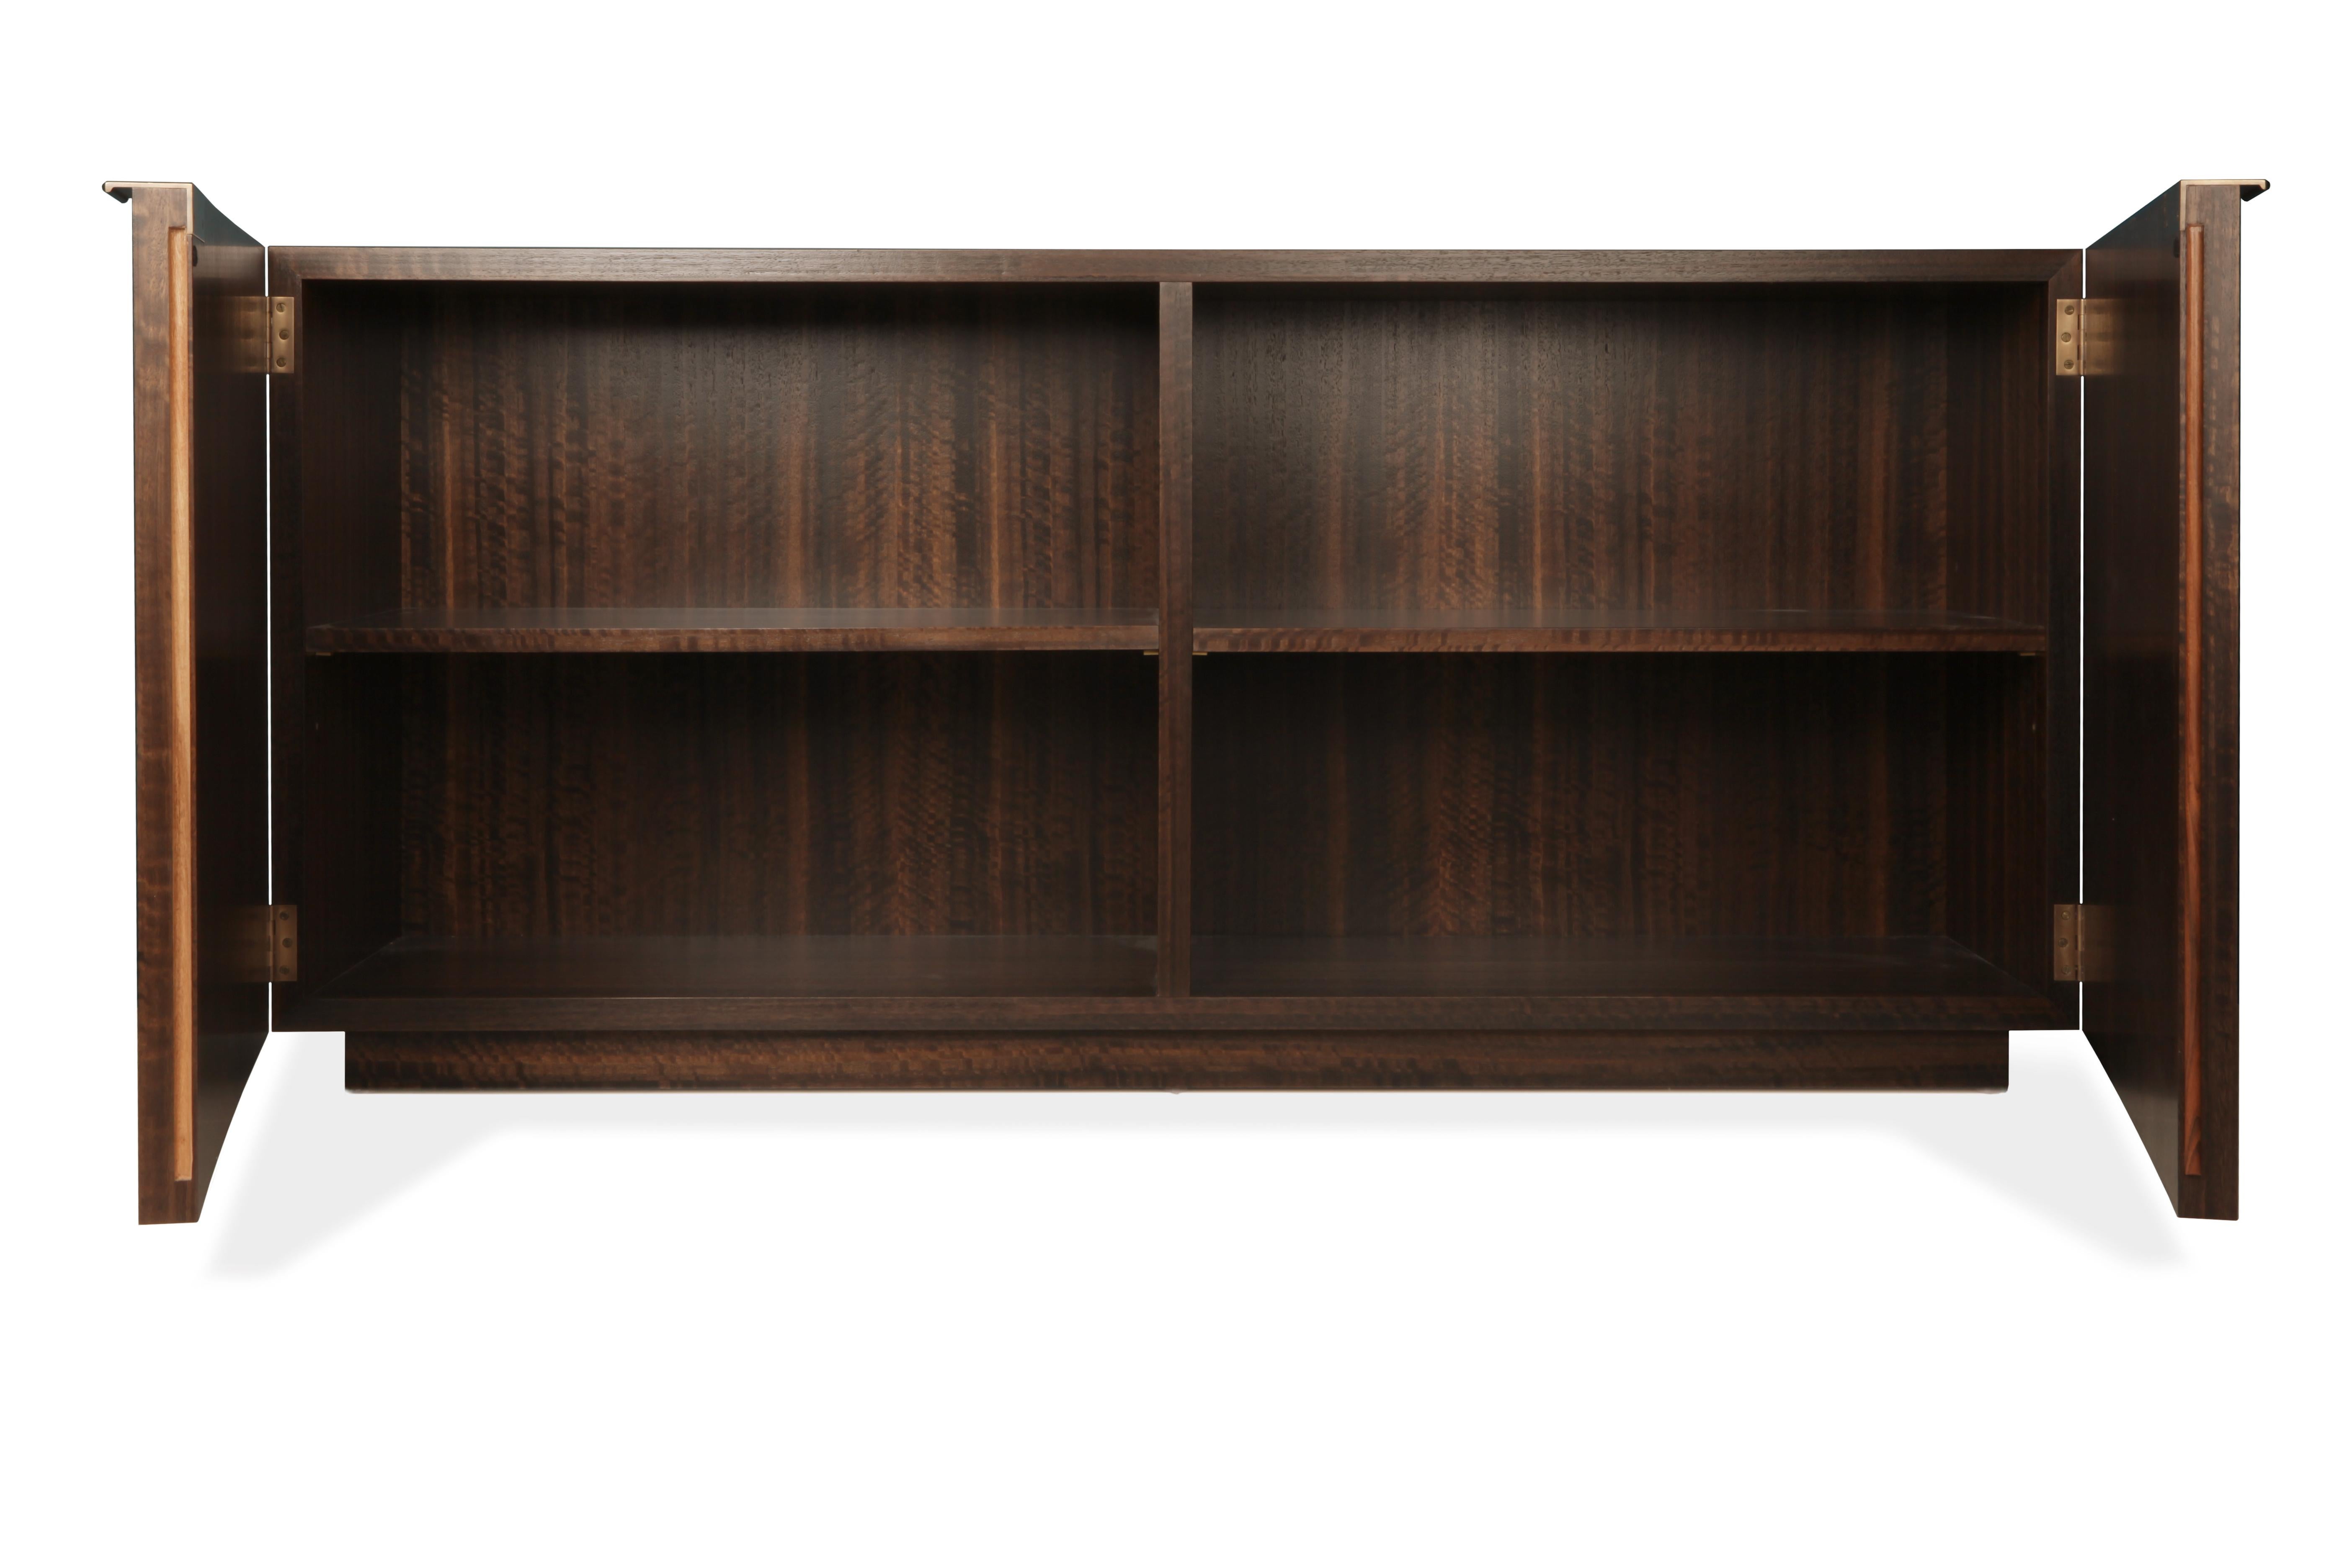 British Porchester Sideboard, Smoked Eucalyptus Handcrafted Cabinet with Mica Inlay For Sale